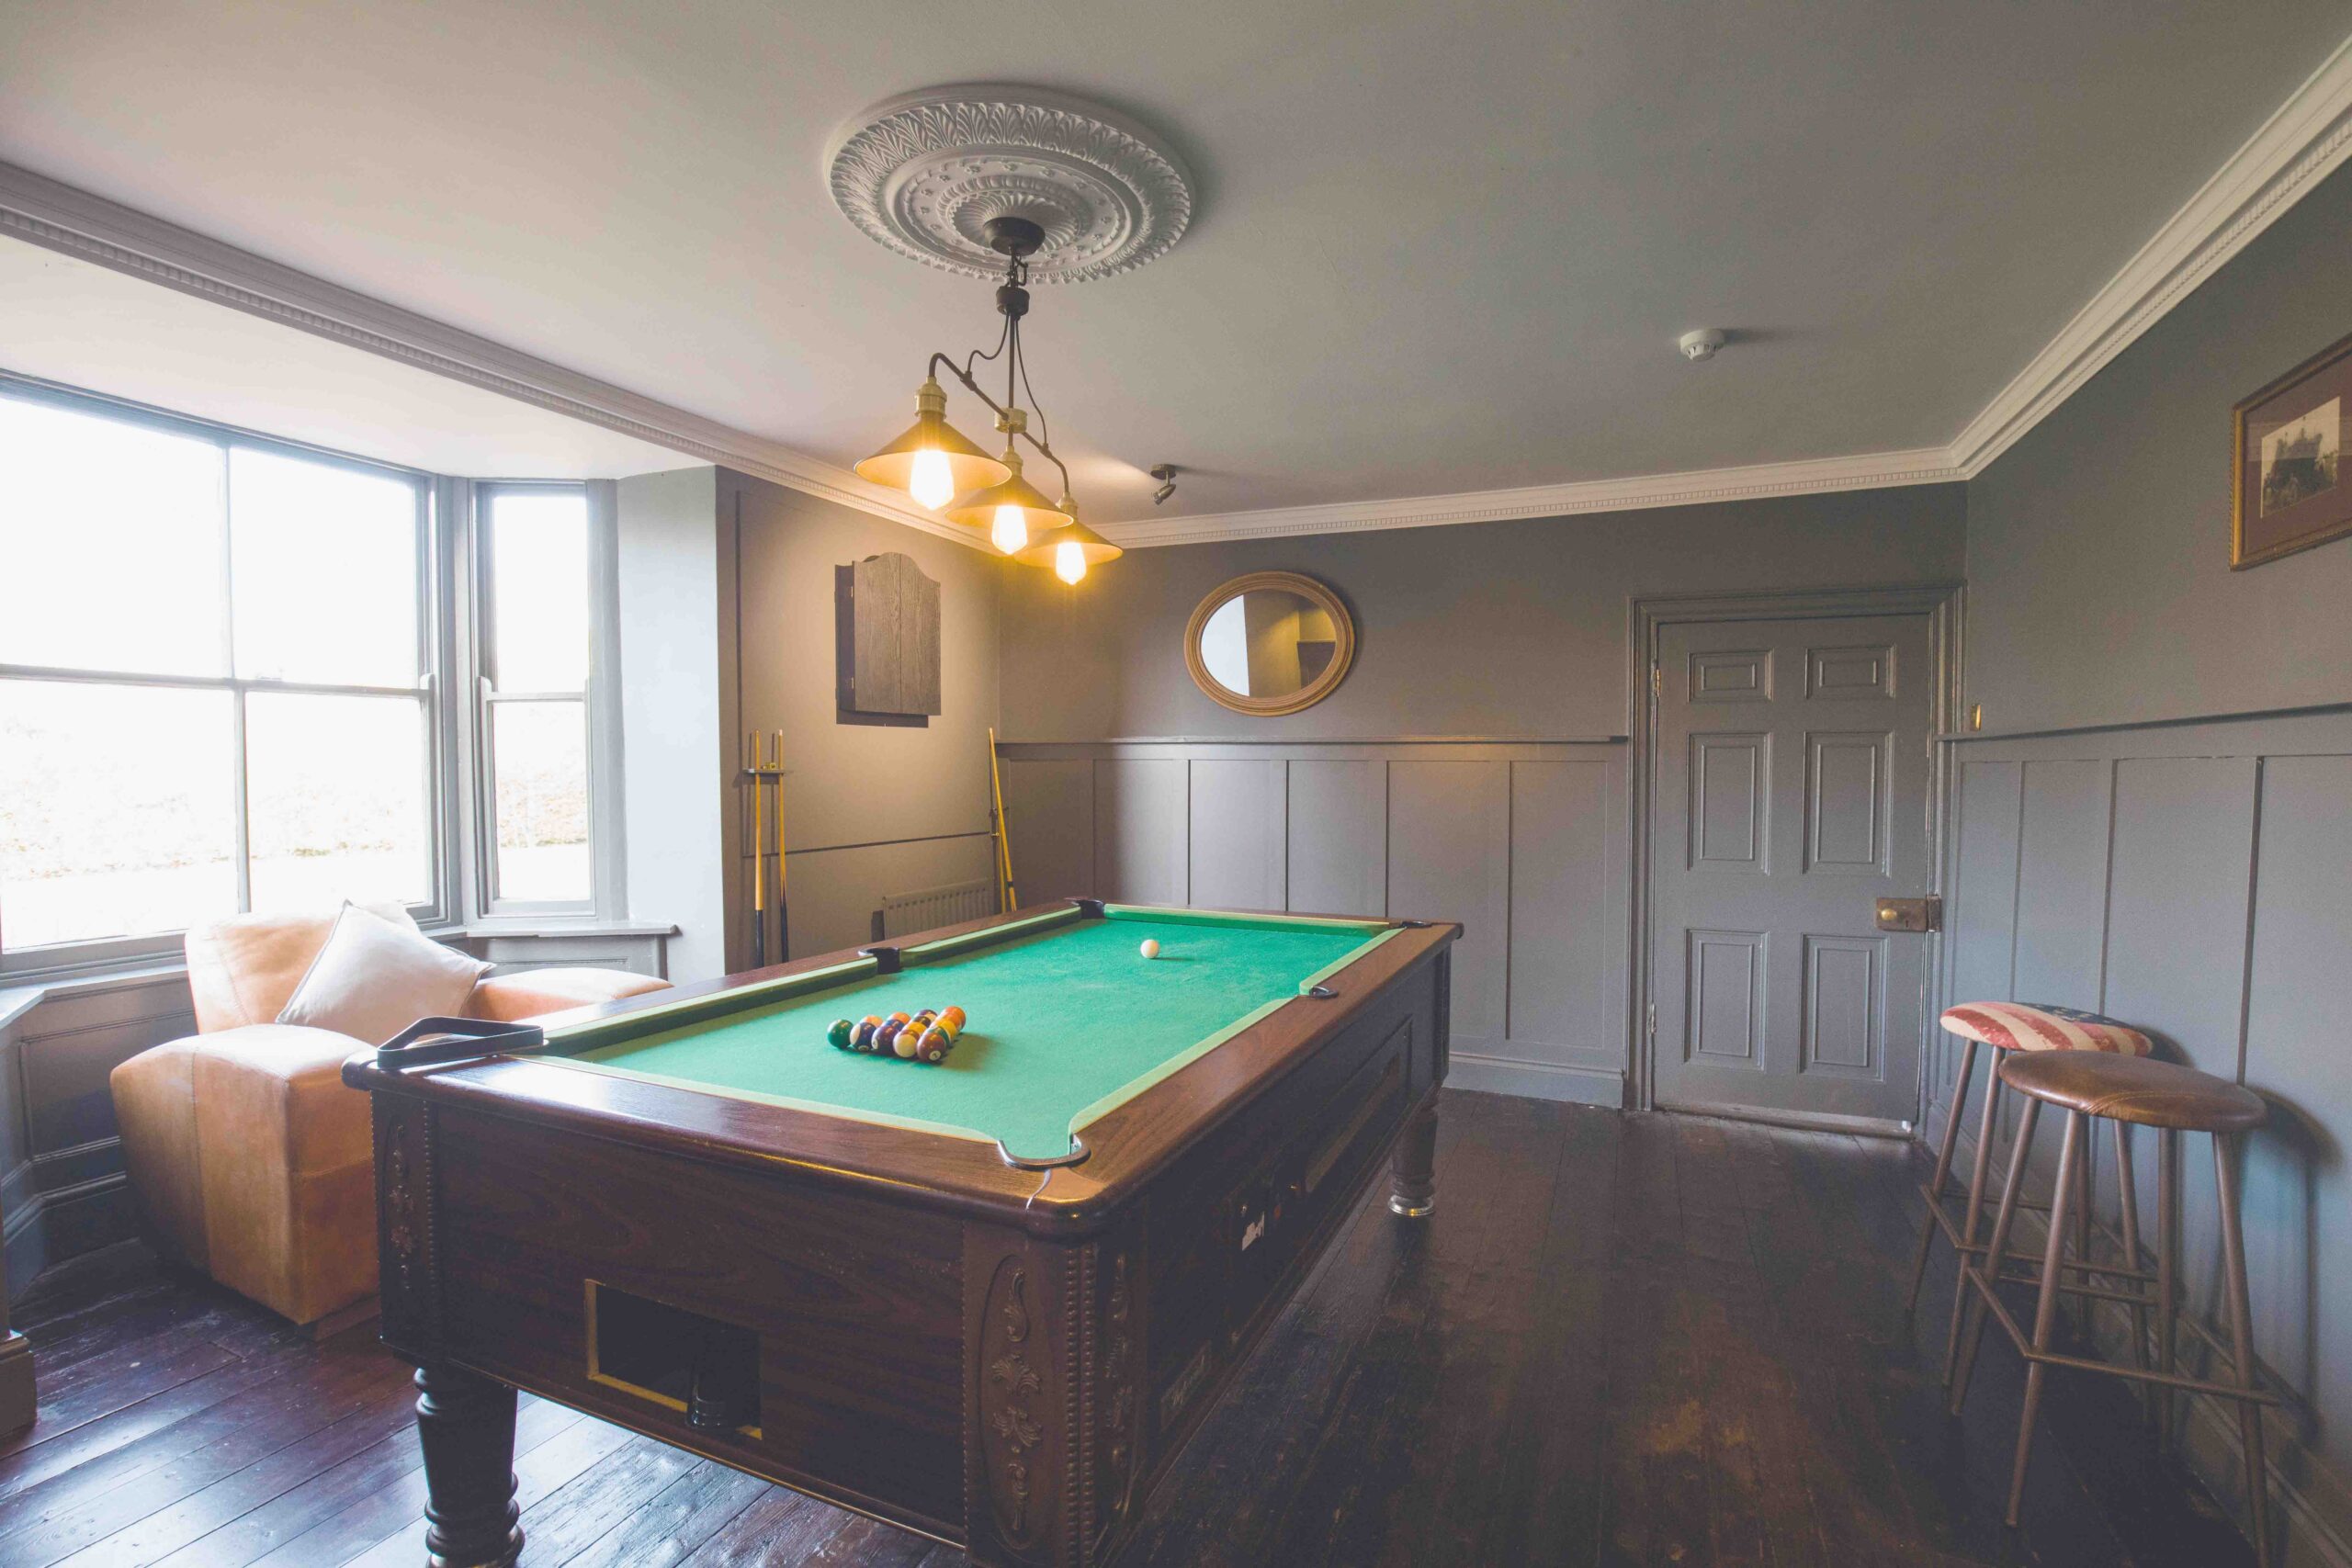 Spray painted games room in grey with snooker table.